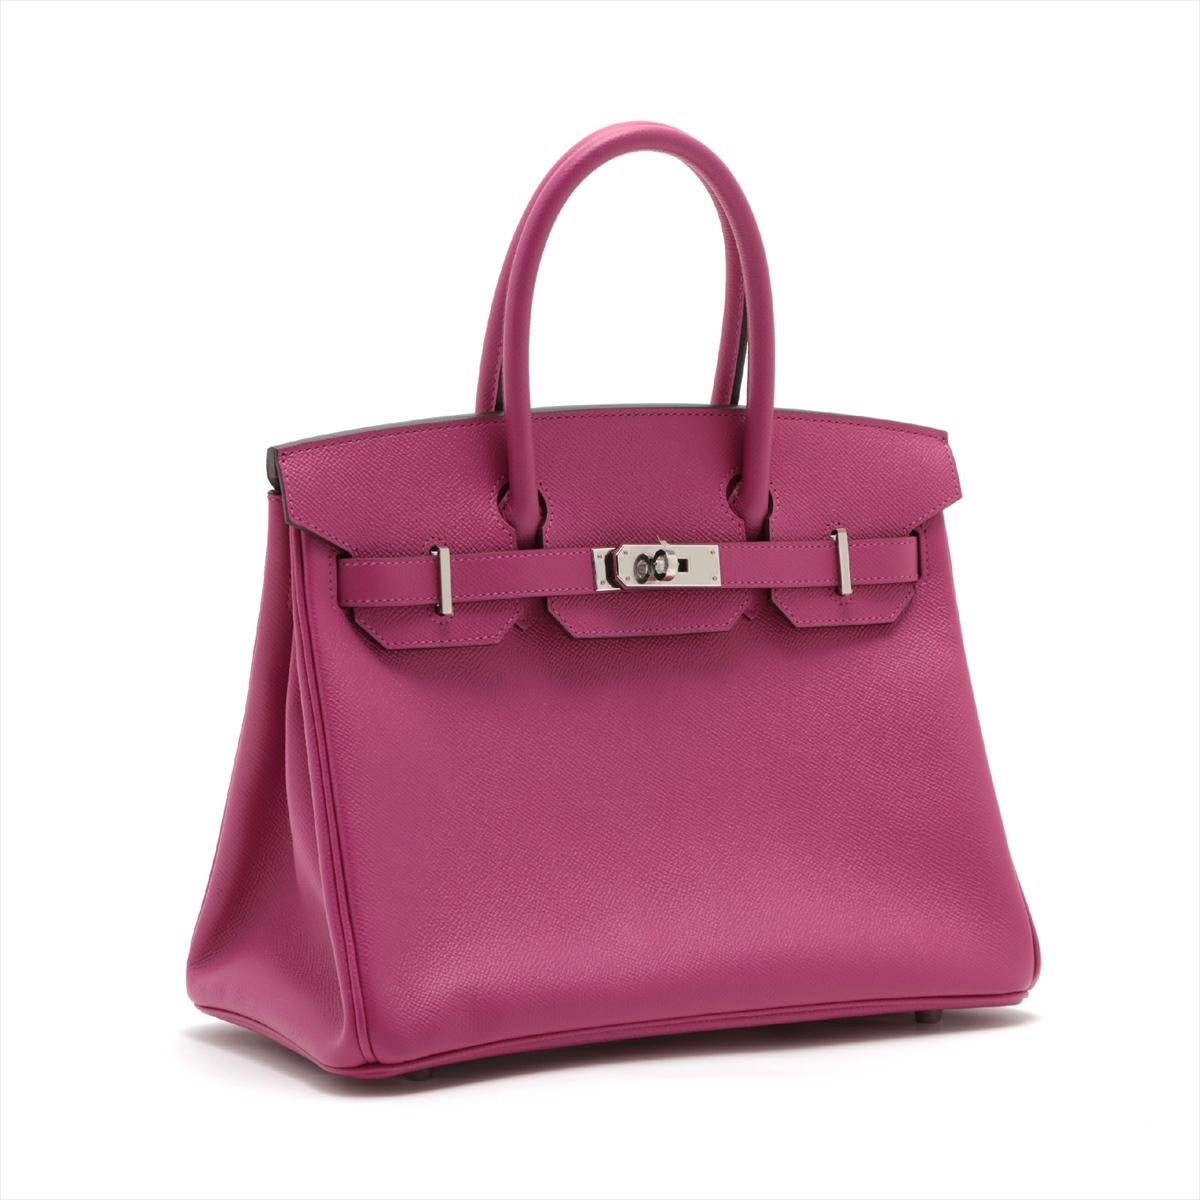 Hermes Birkin 30cm Rose Pourpre Epsom Leather Palladium Hardware In Good Condition For Sale In Sydney, New South Wales